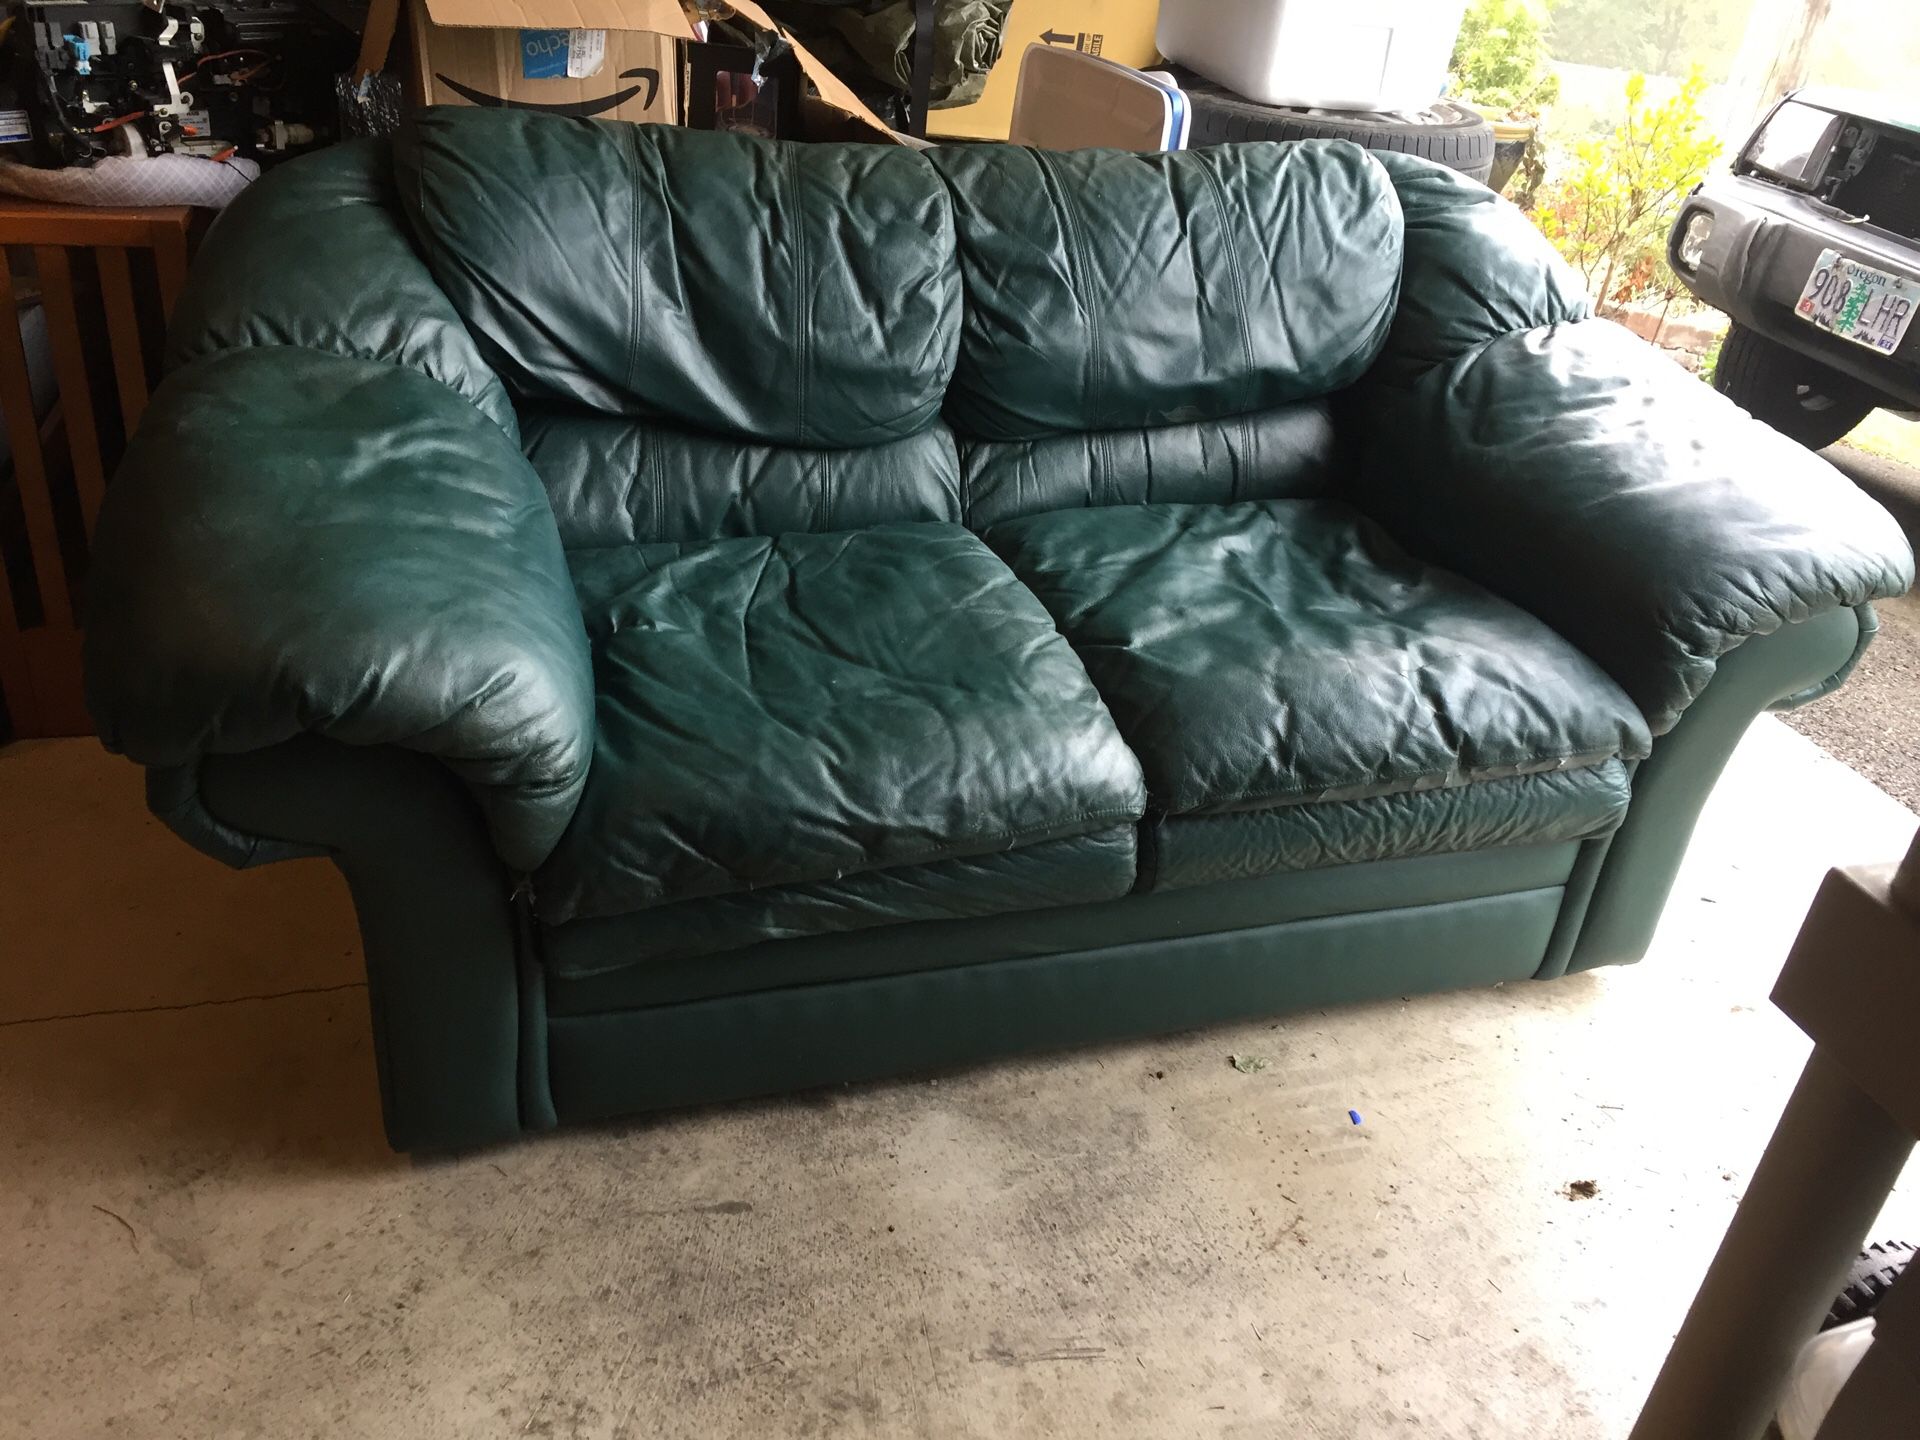 Free couch/love seat - good condition, stored dry